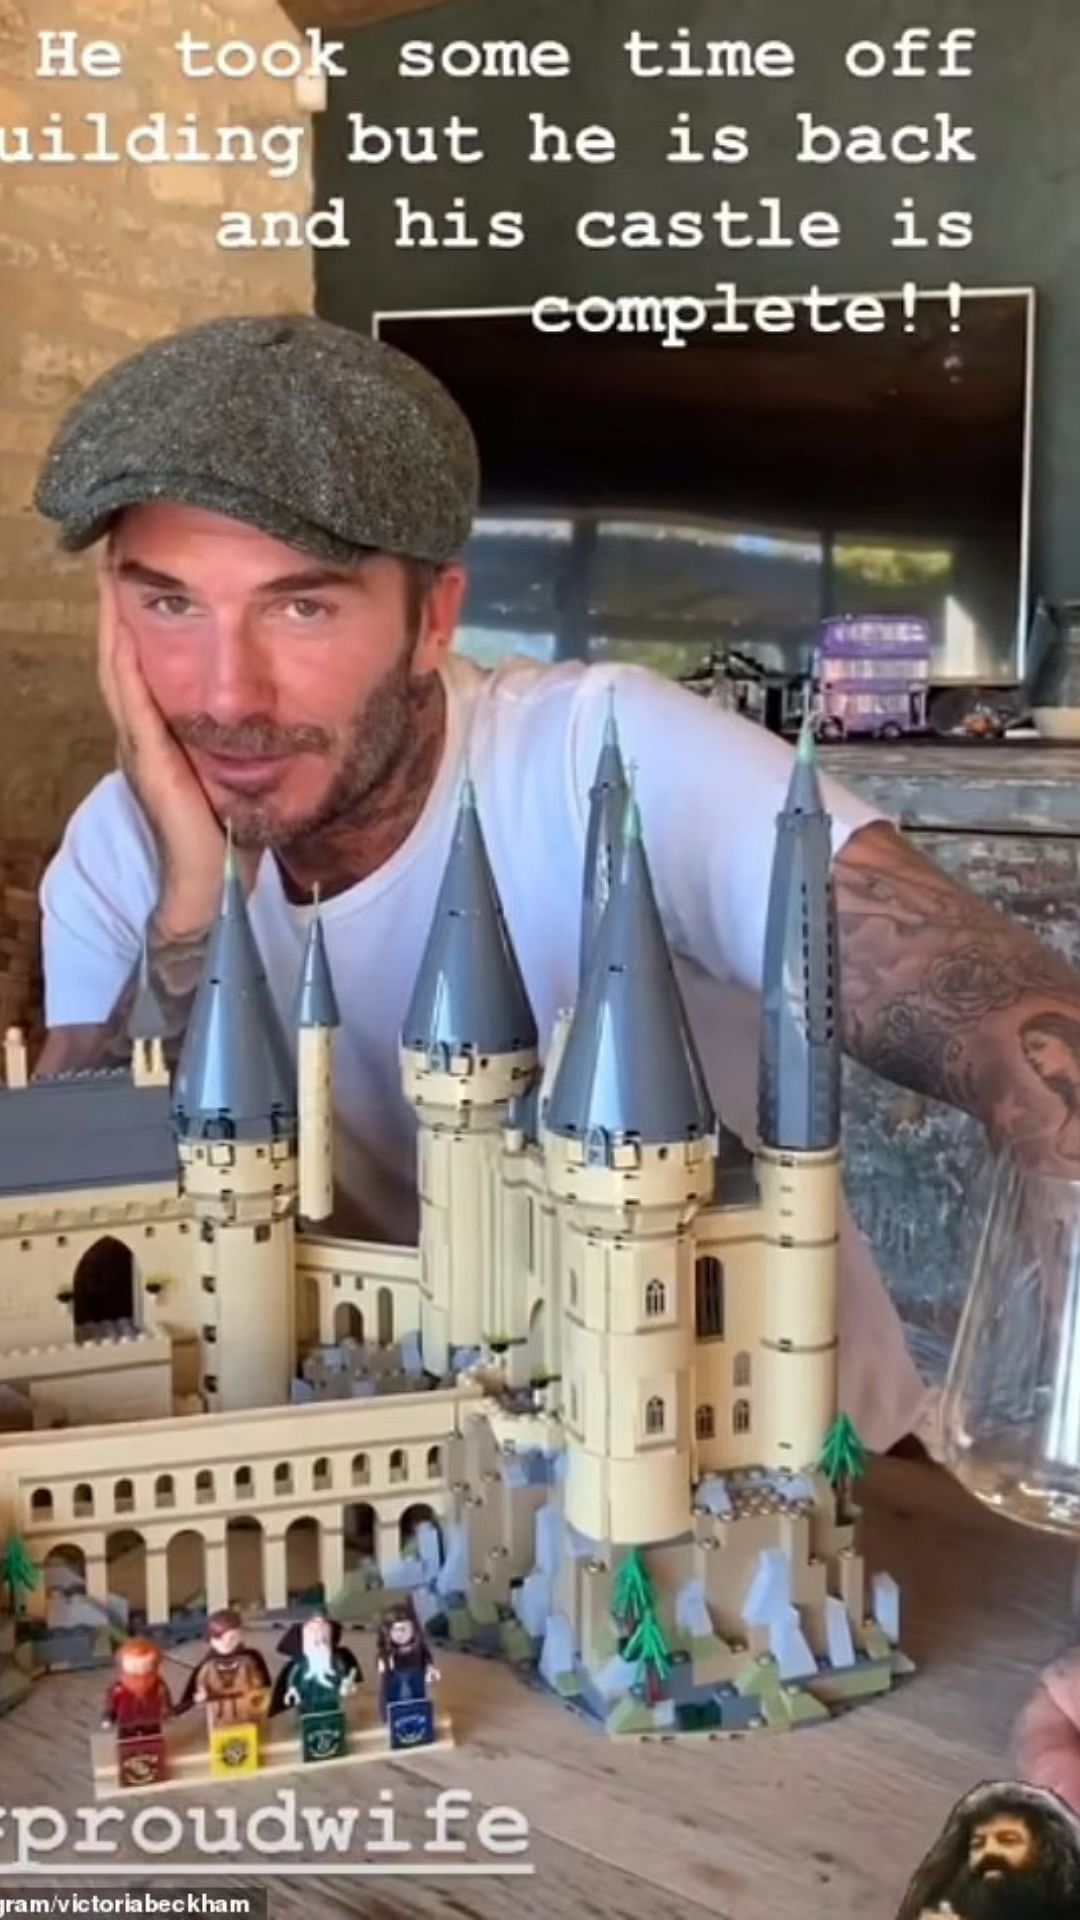 Victoria Beckham&#039;s post about her husband&#039;s Lego habits